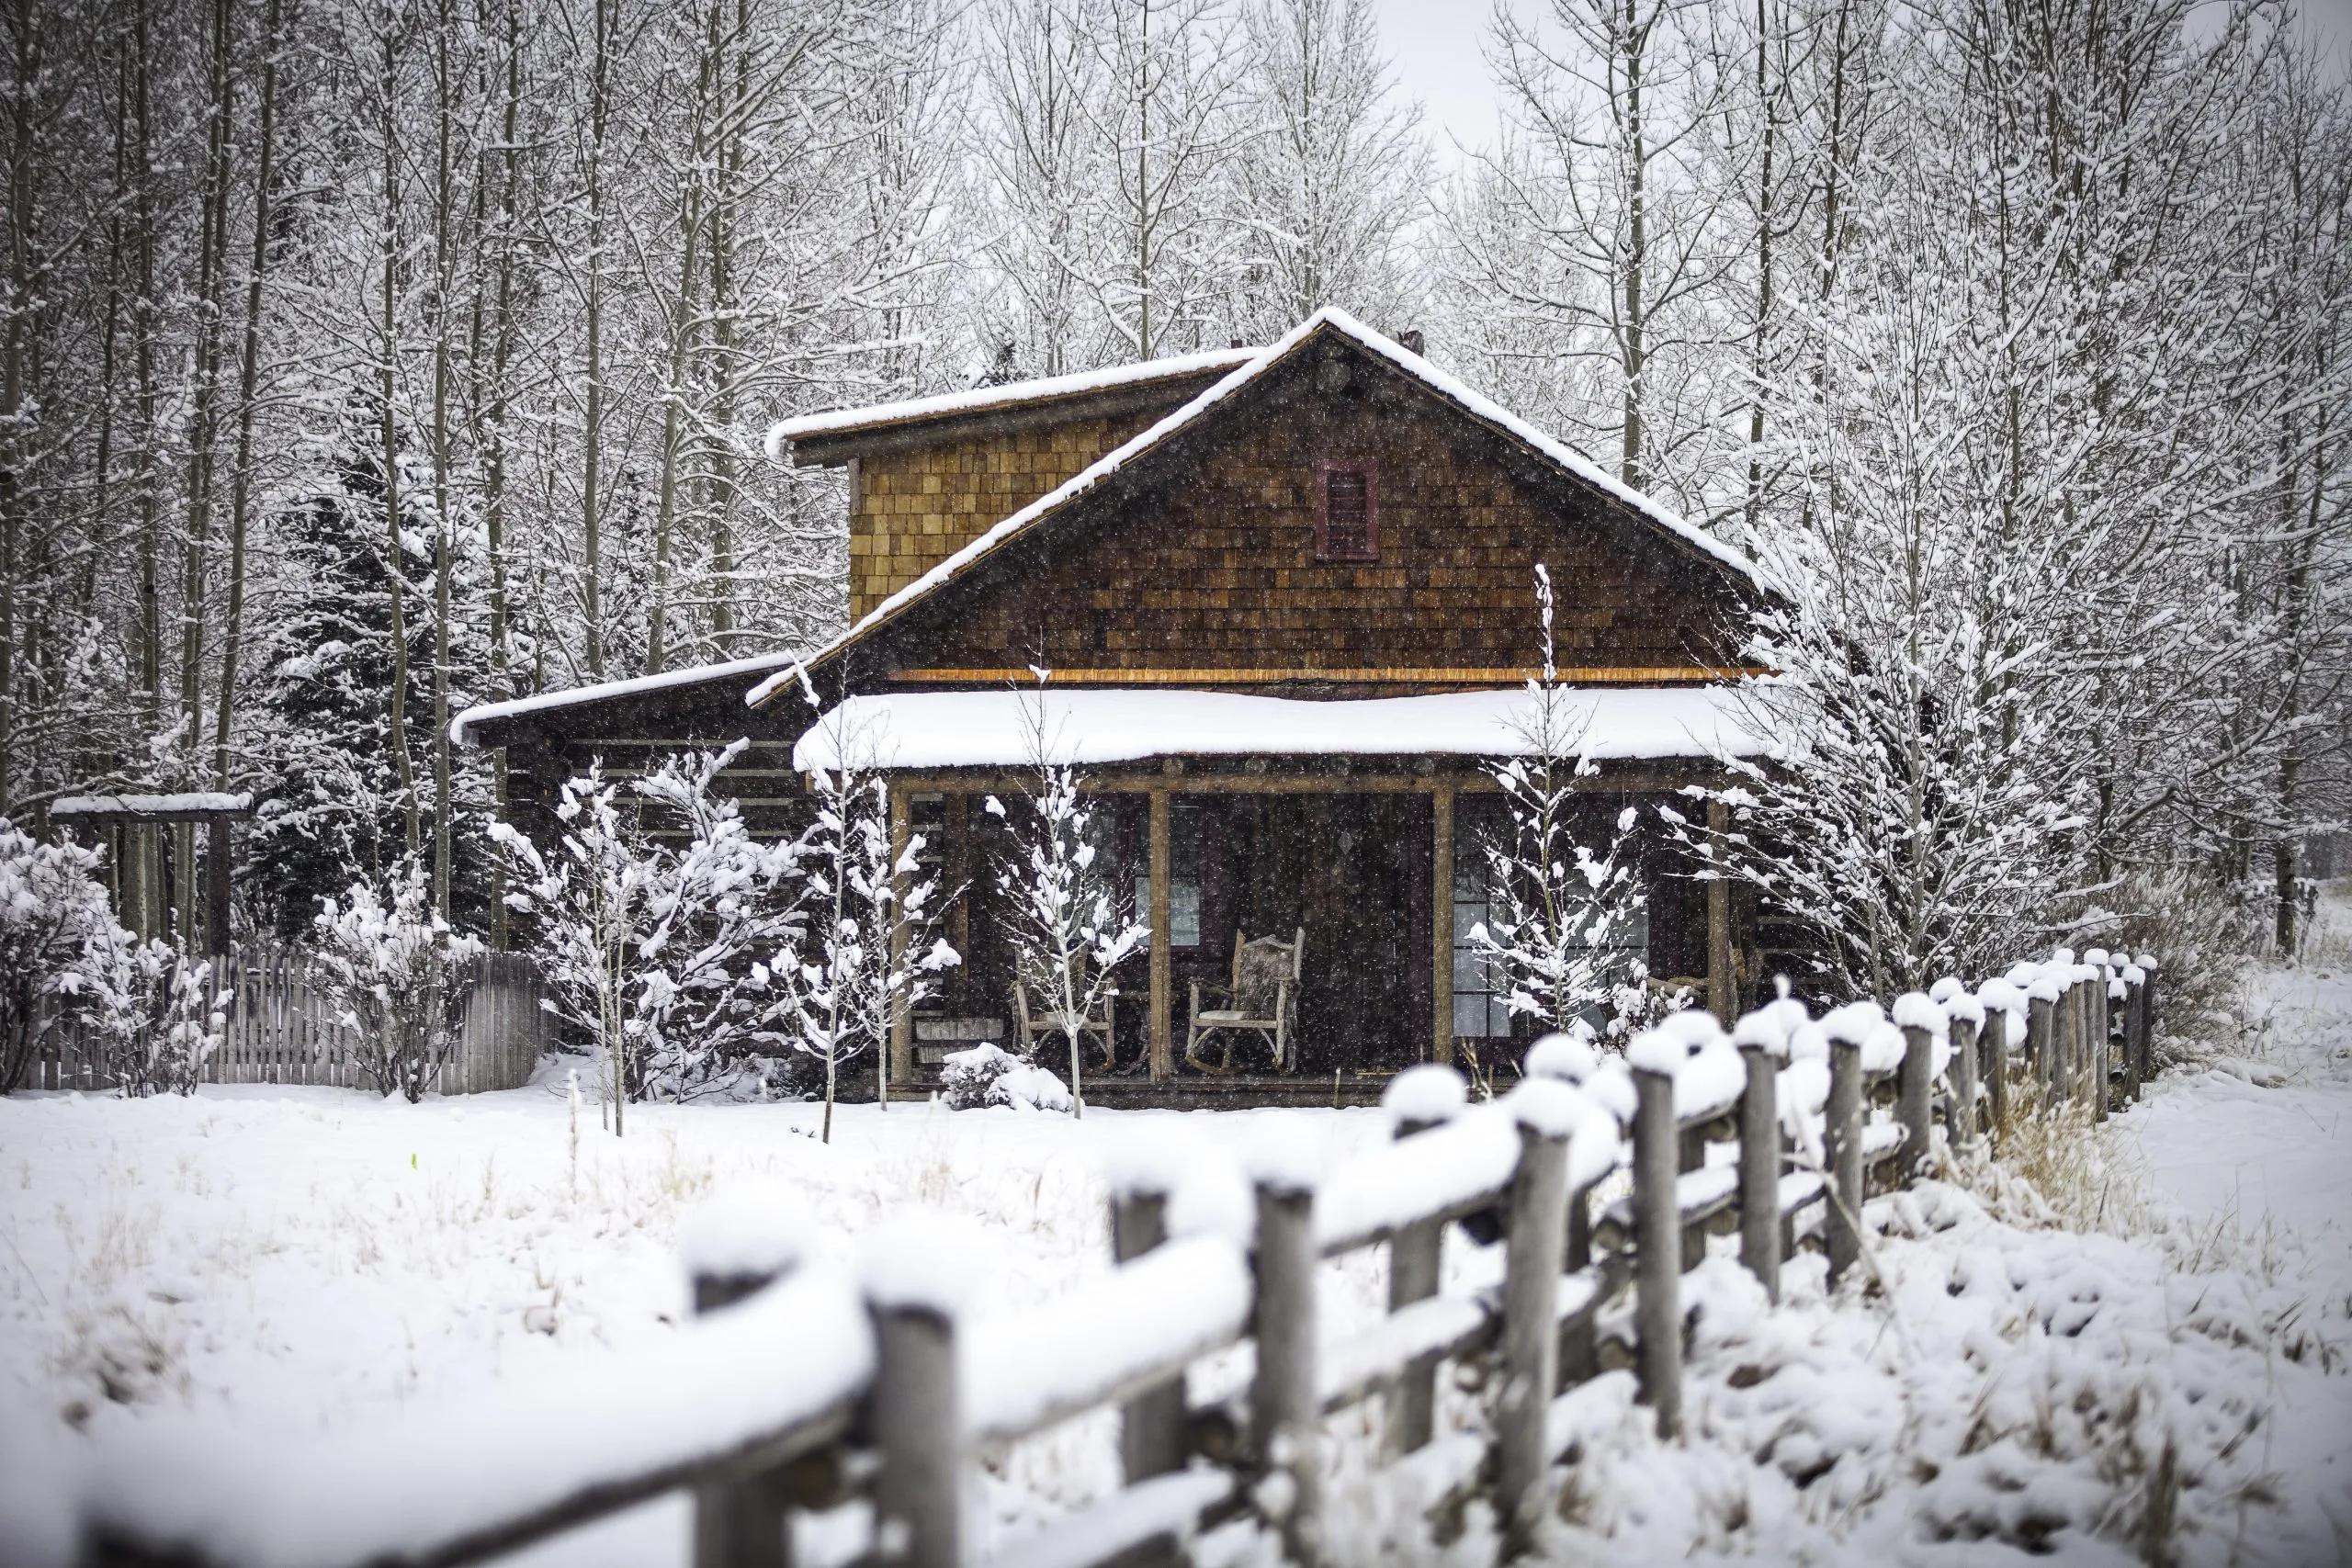 Cabin covered in snow during the winter